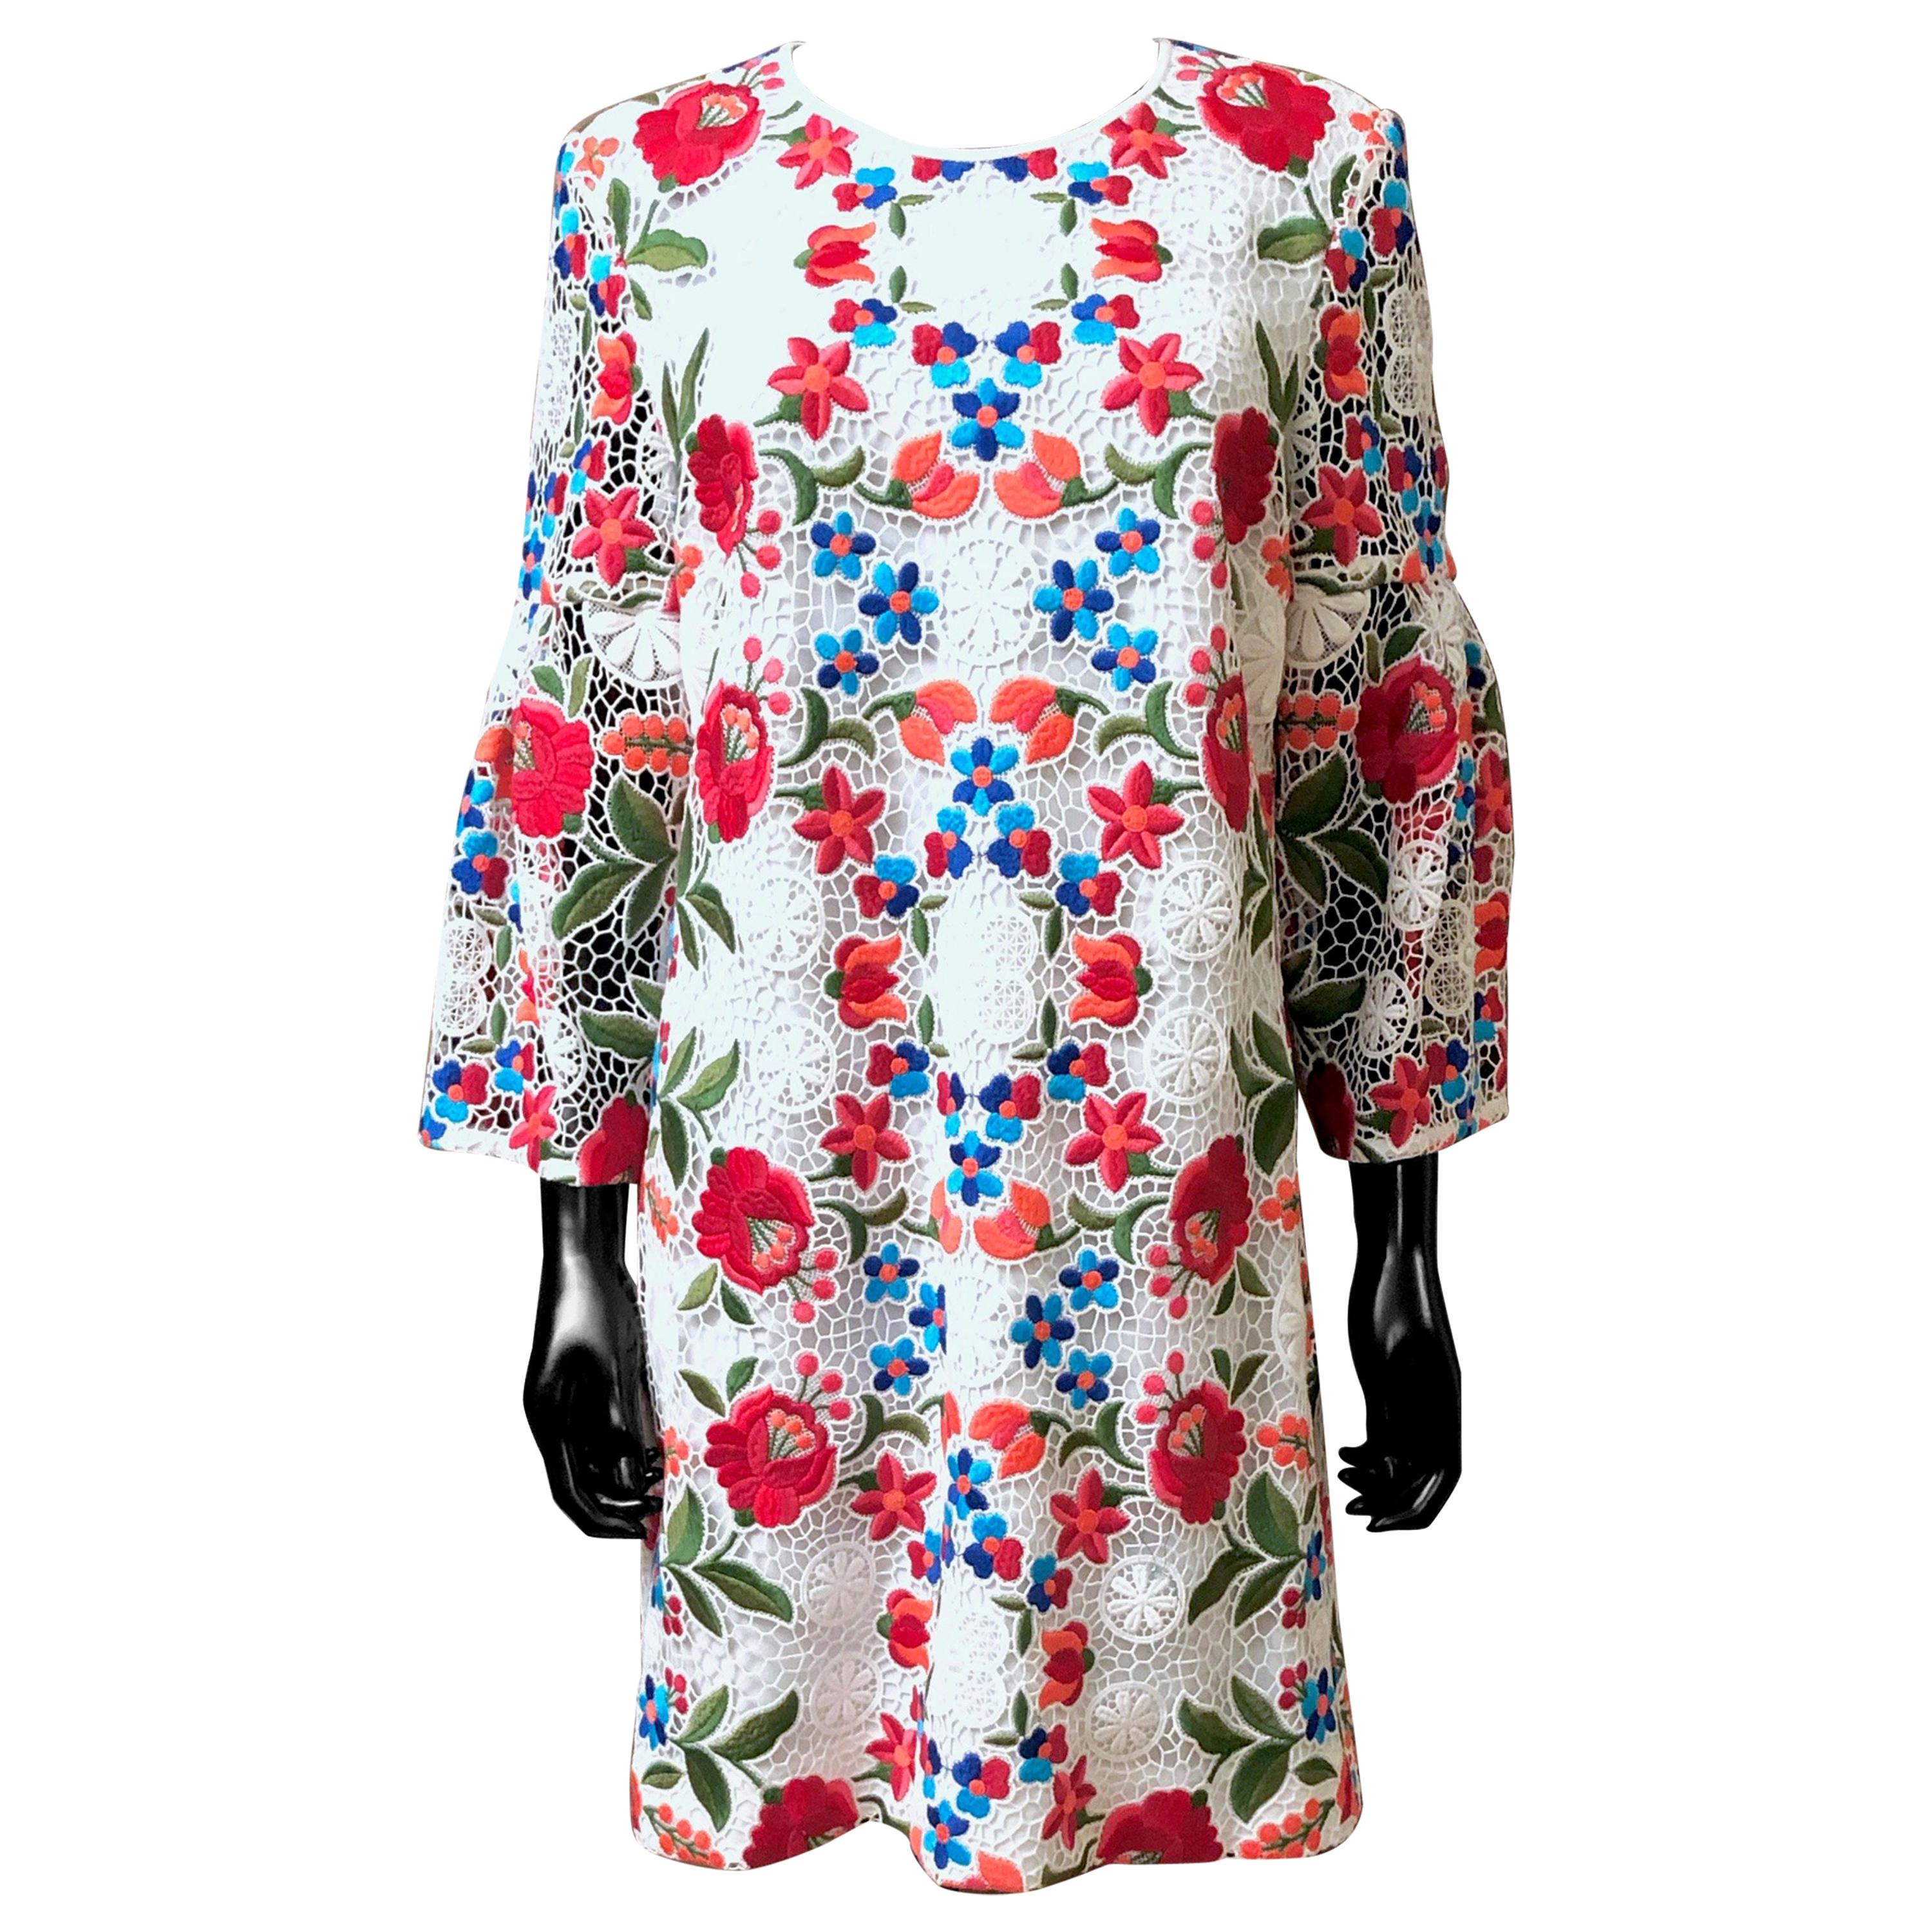 Burberry Floral Embroidered Lace Dress